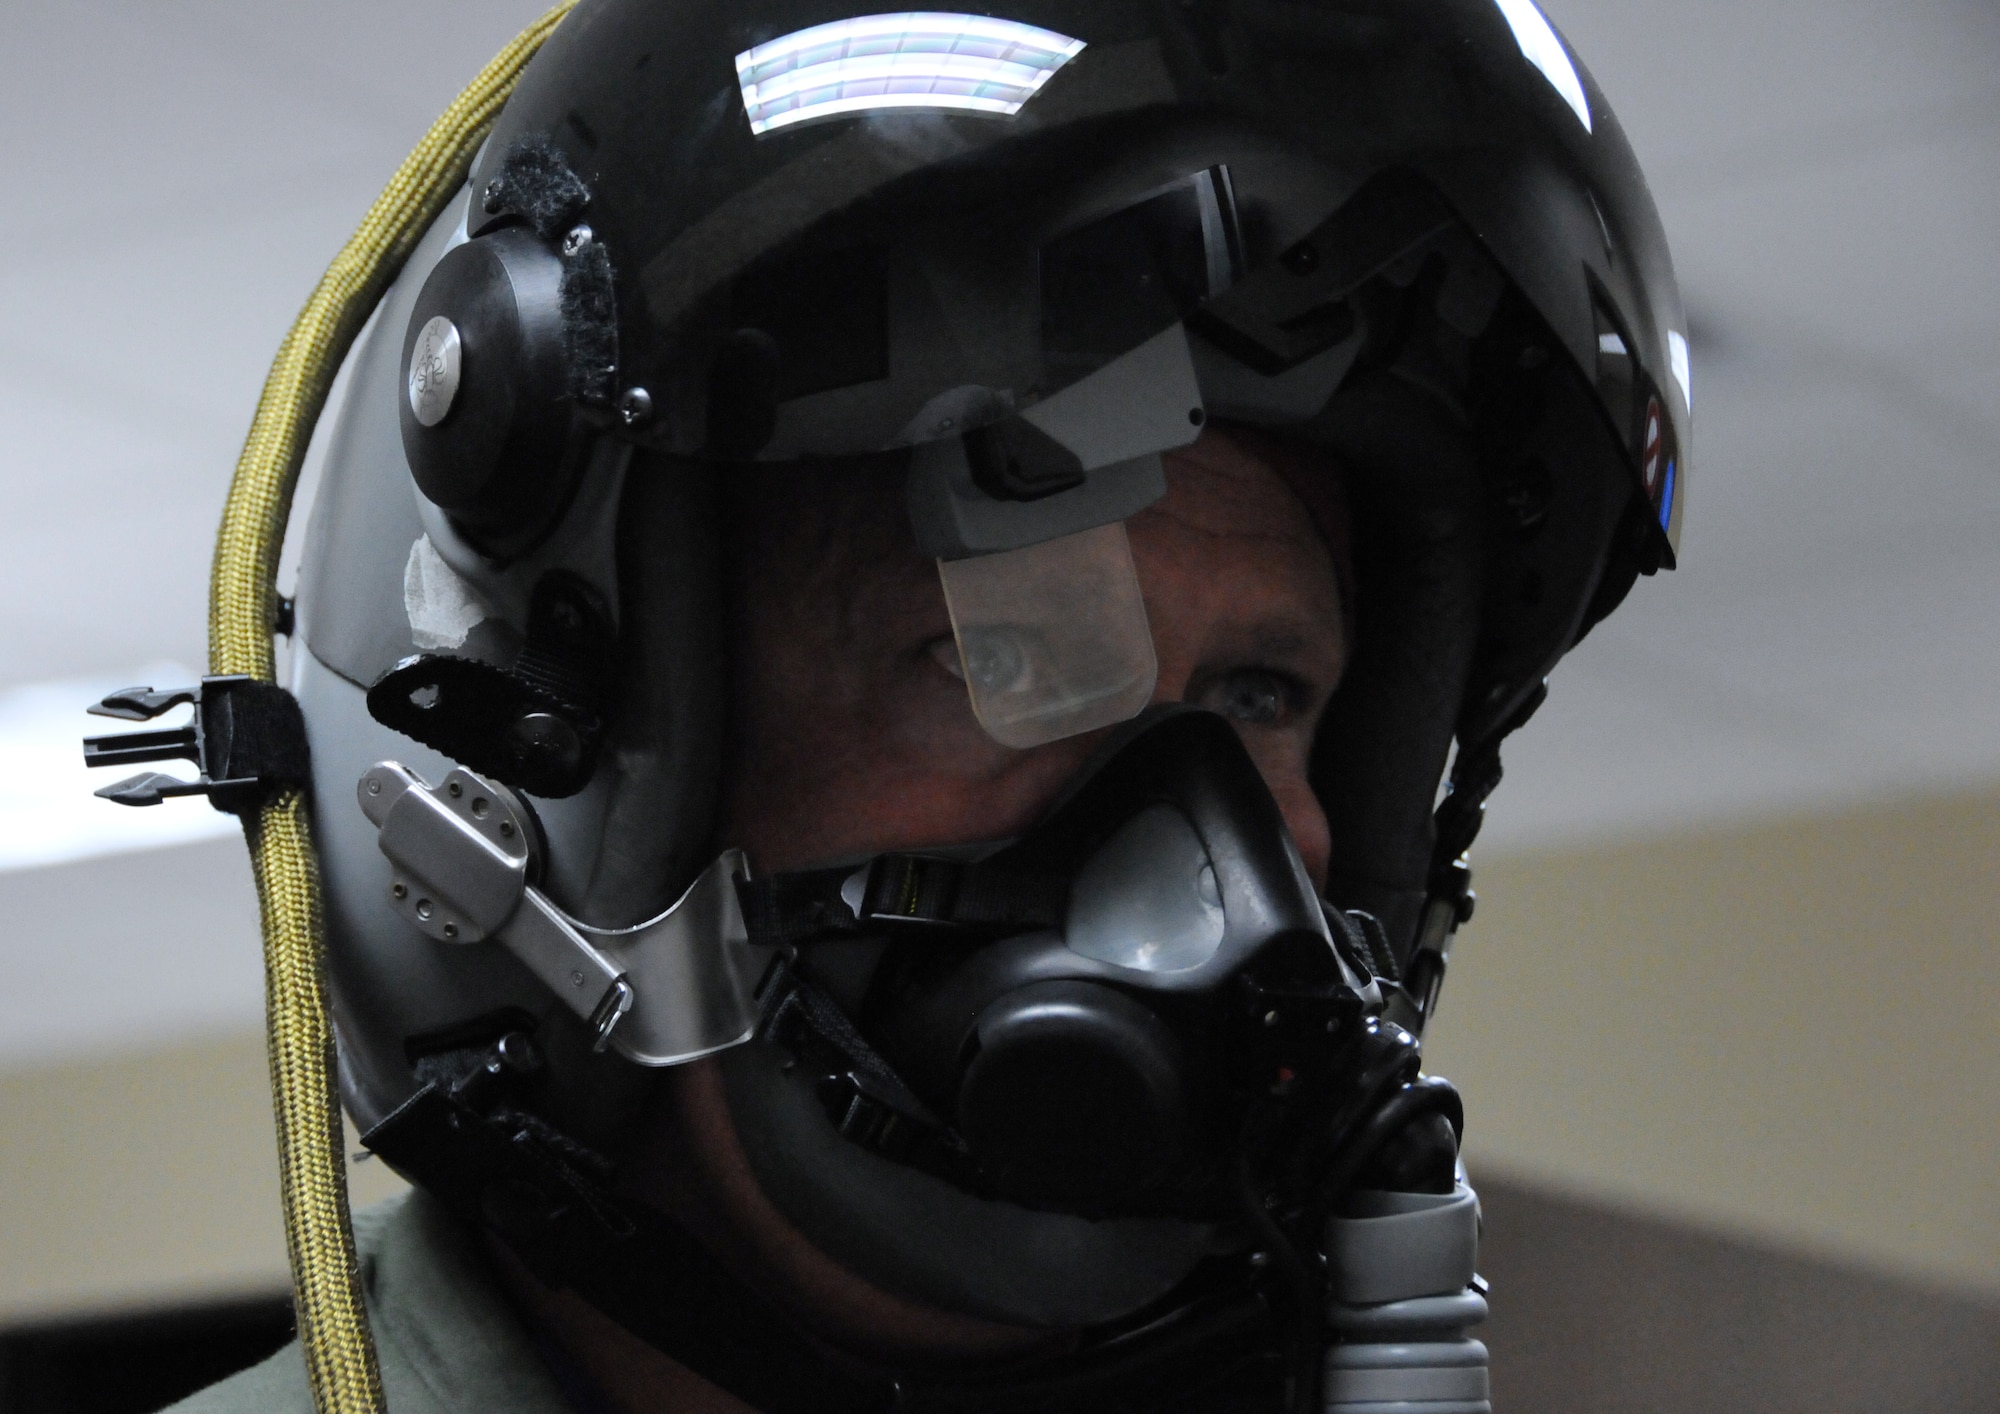 Maj. Robert Lytle, 93rd Fighter Squadron director of operations and F-16 pilot, tests the Helmet Mounted Integrated Targeting unit at Homestead Air Reserve Base, Fla., July 17. HMIT, currently being fielded at Homestead ARB, is an avionics system that gives the pilot the ability to cue a weapon against a target simply by looking at it anywhere in the cockpit. (U.S. Air Force photo/Ross Tweten) 